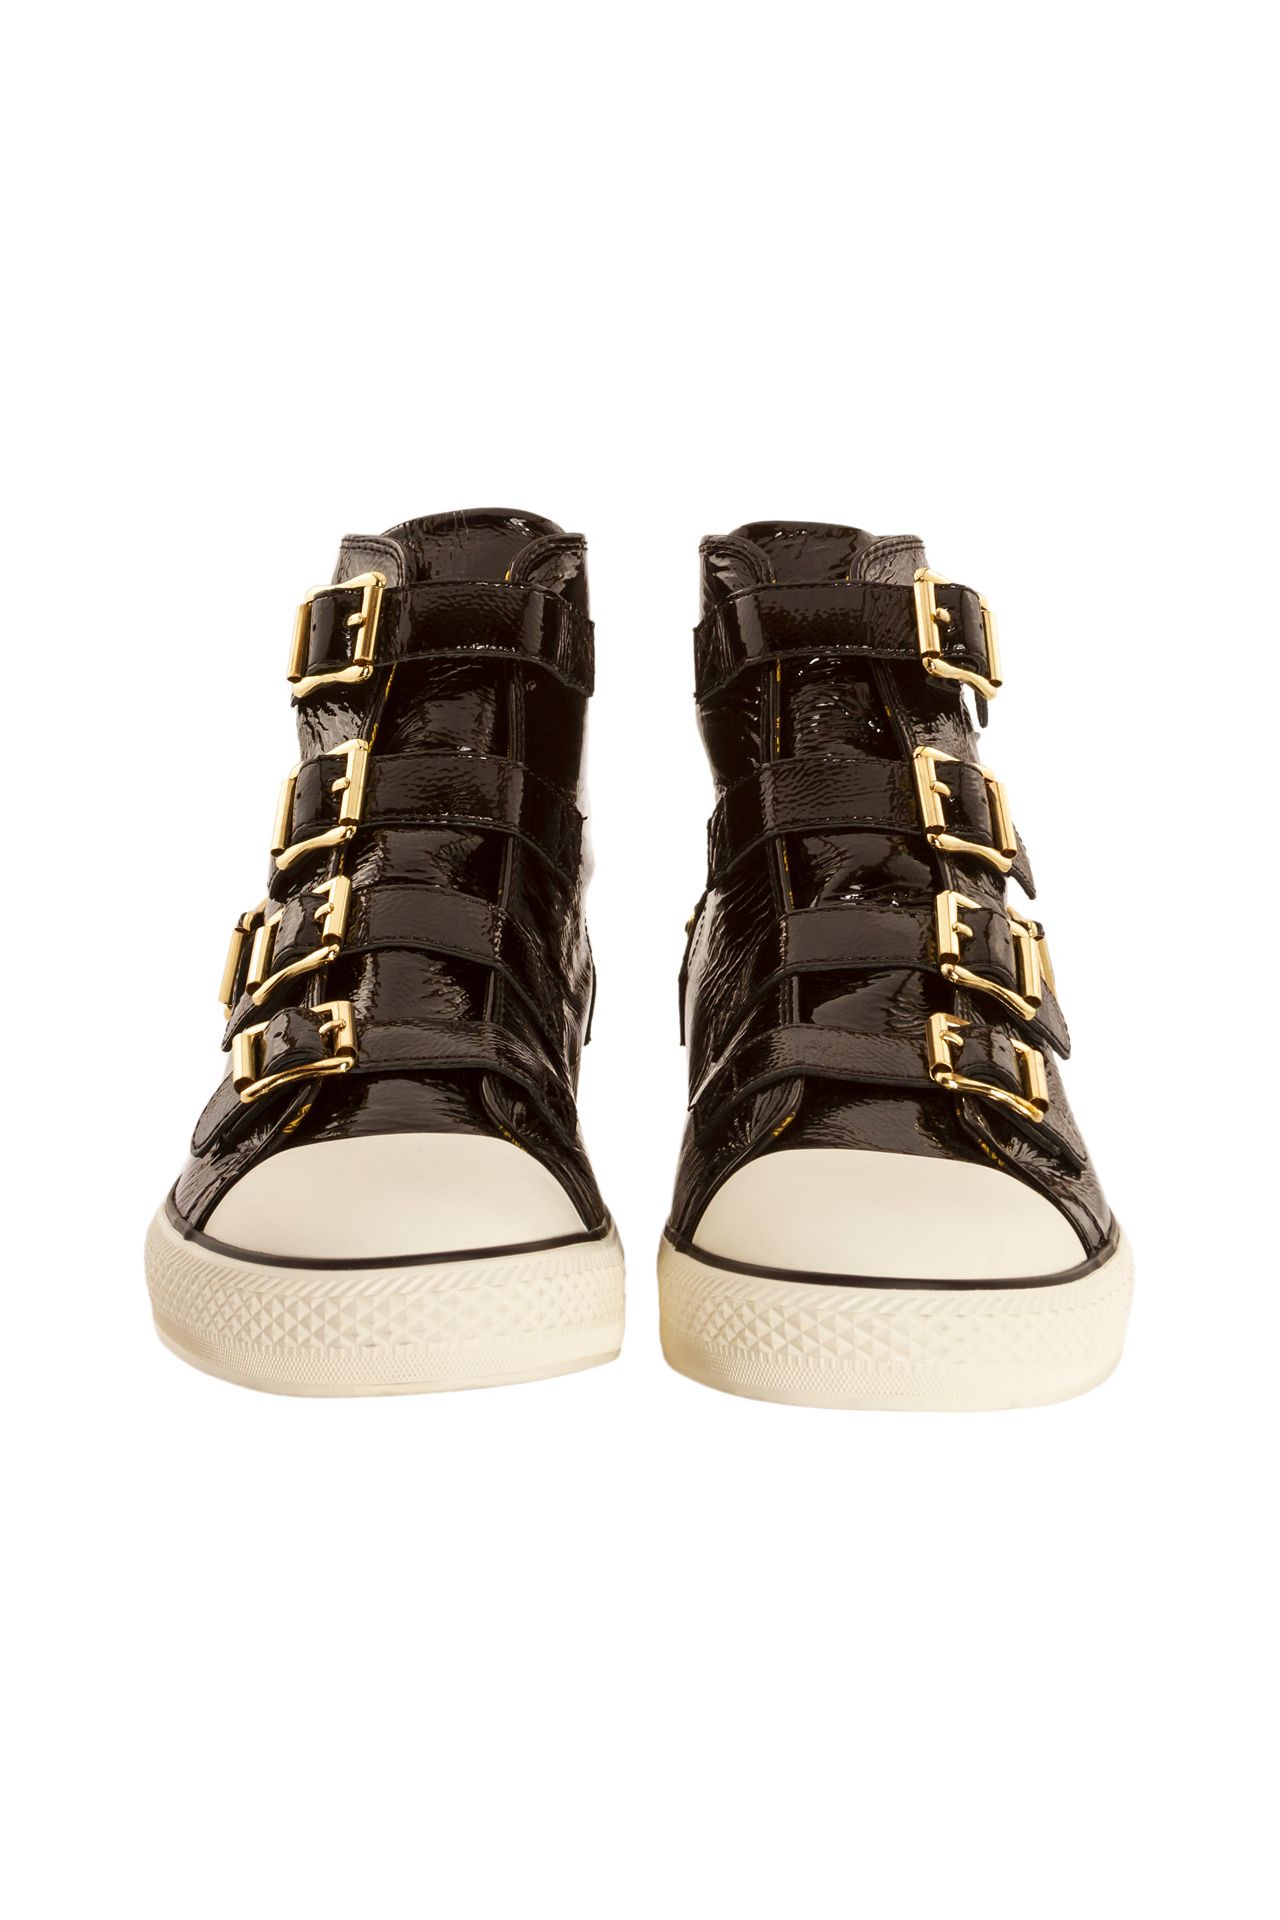 TEAM ROBIN HIGH TOP IN BLACK W/ CRYSTALS